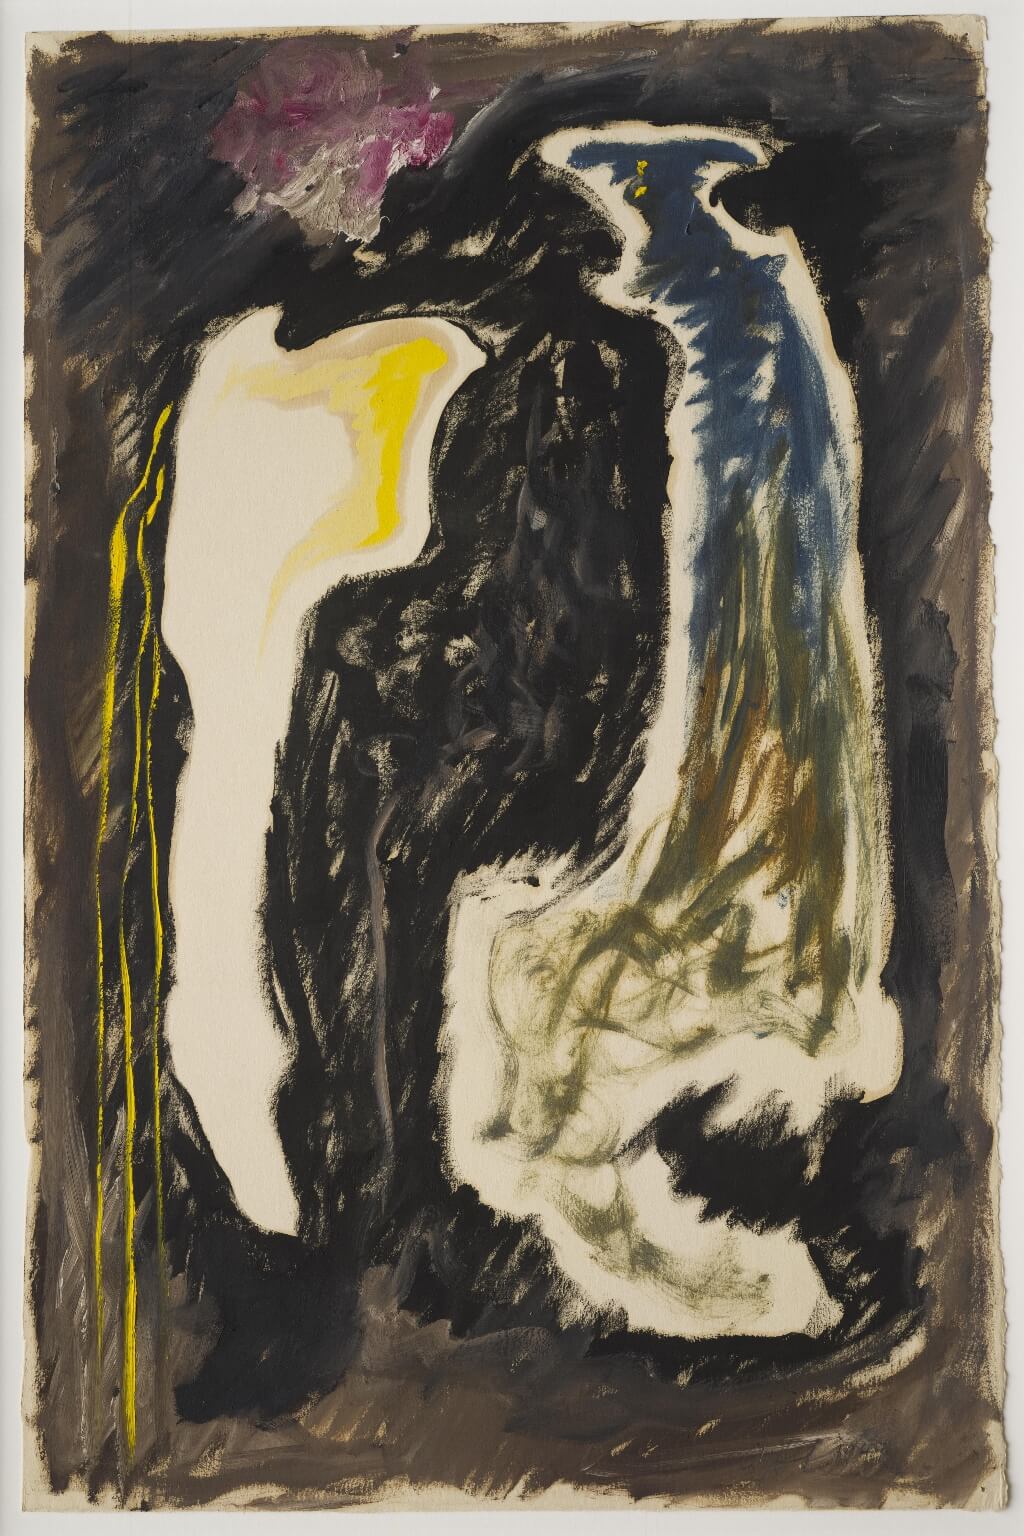 Abstract oil painting on paper with two figures that seem to interact with each other with black, brown, and yellow background and one figure is white and yellow while the other is green and blue